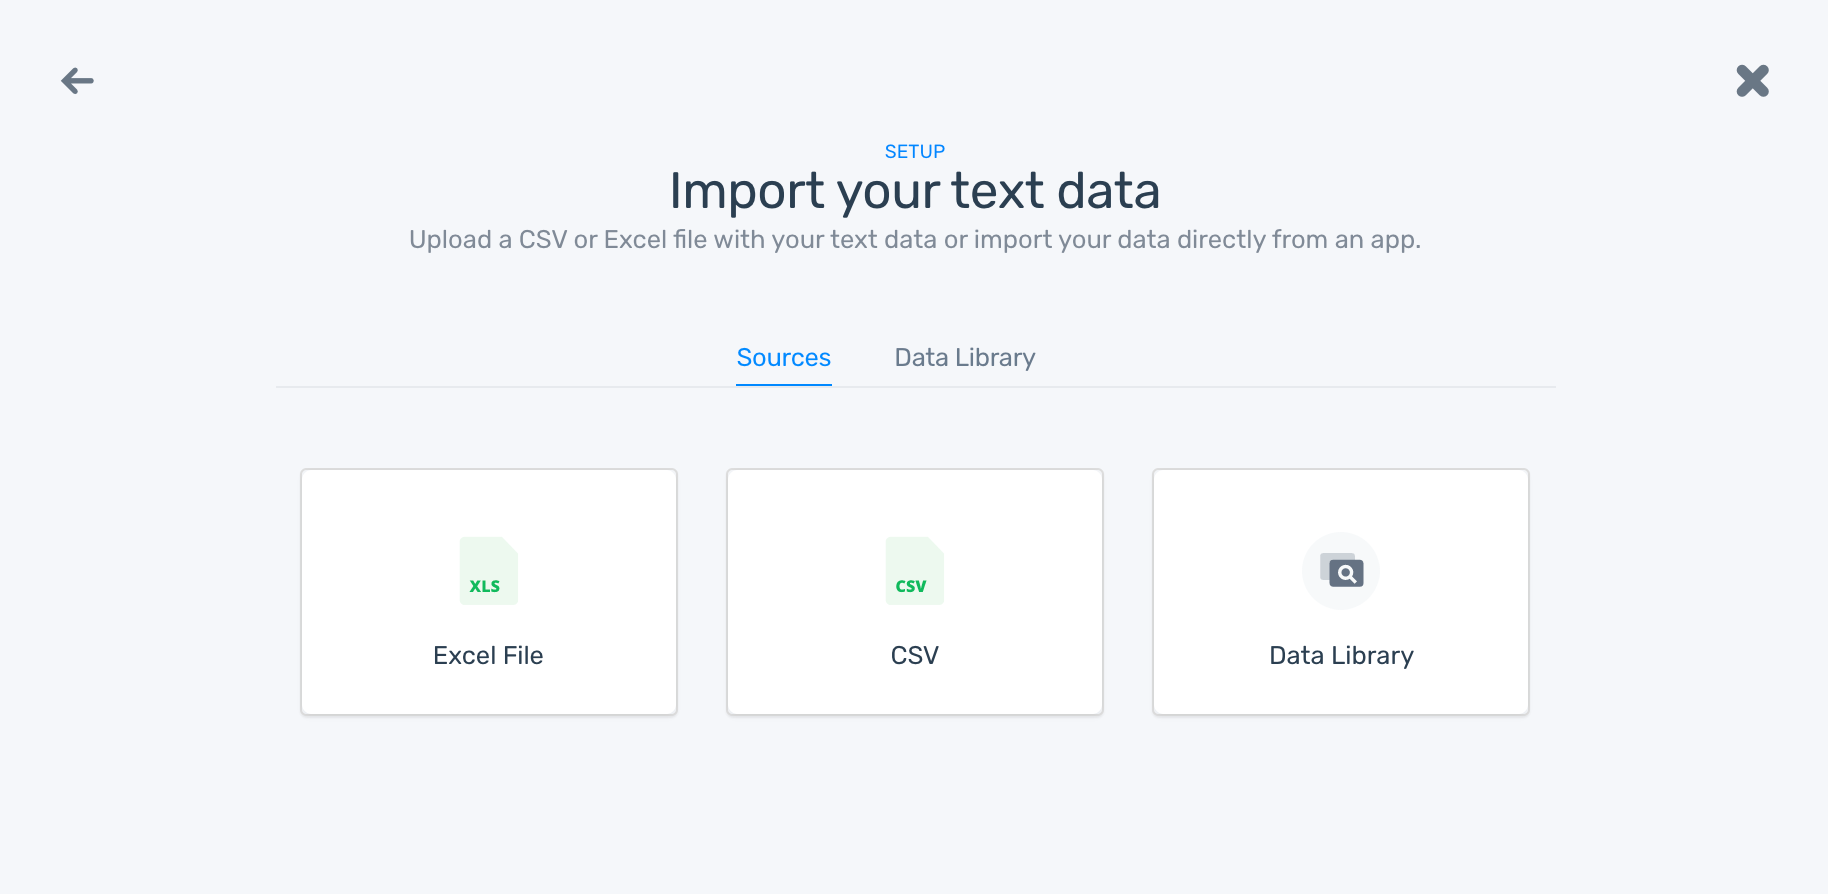 MonkeyLearn's model builder with the option to import your training data as an Excel file, CSV file, or using example training data from the data library